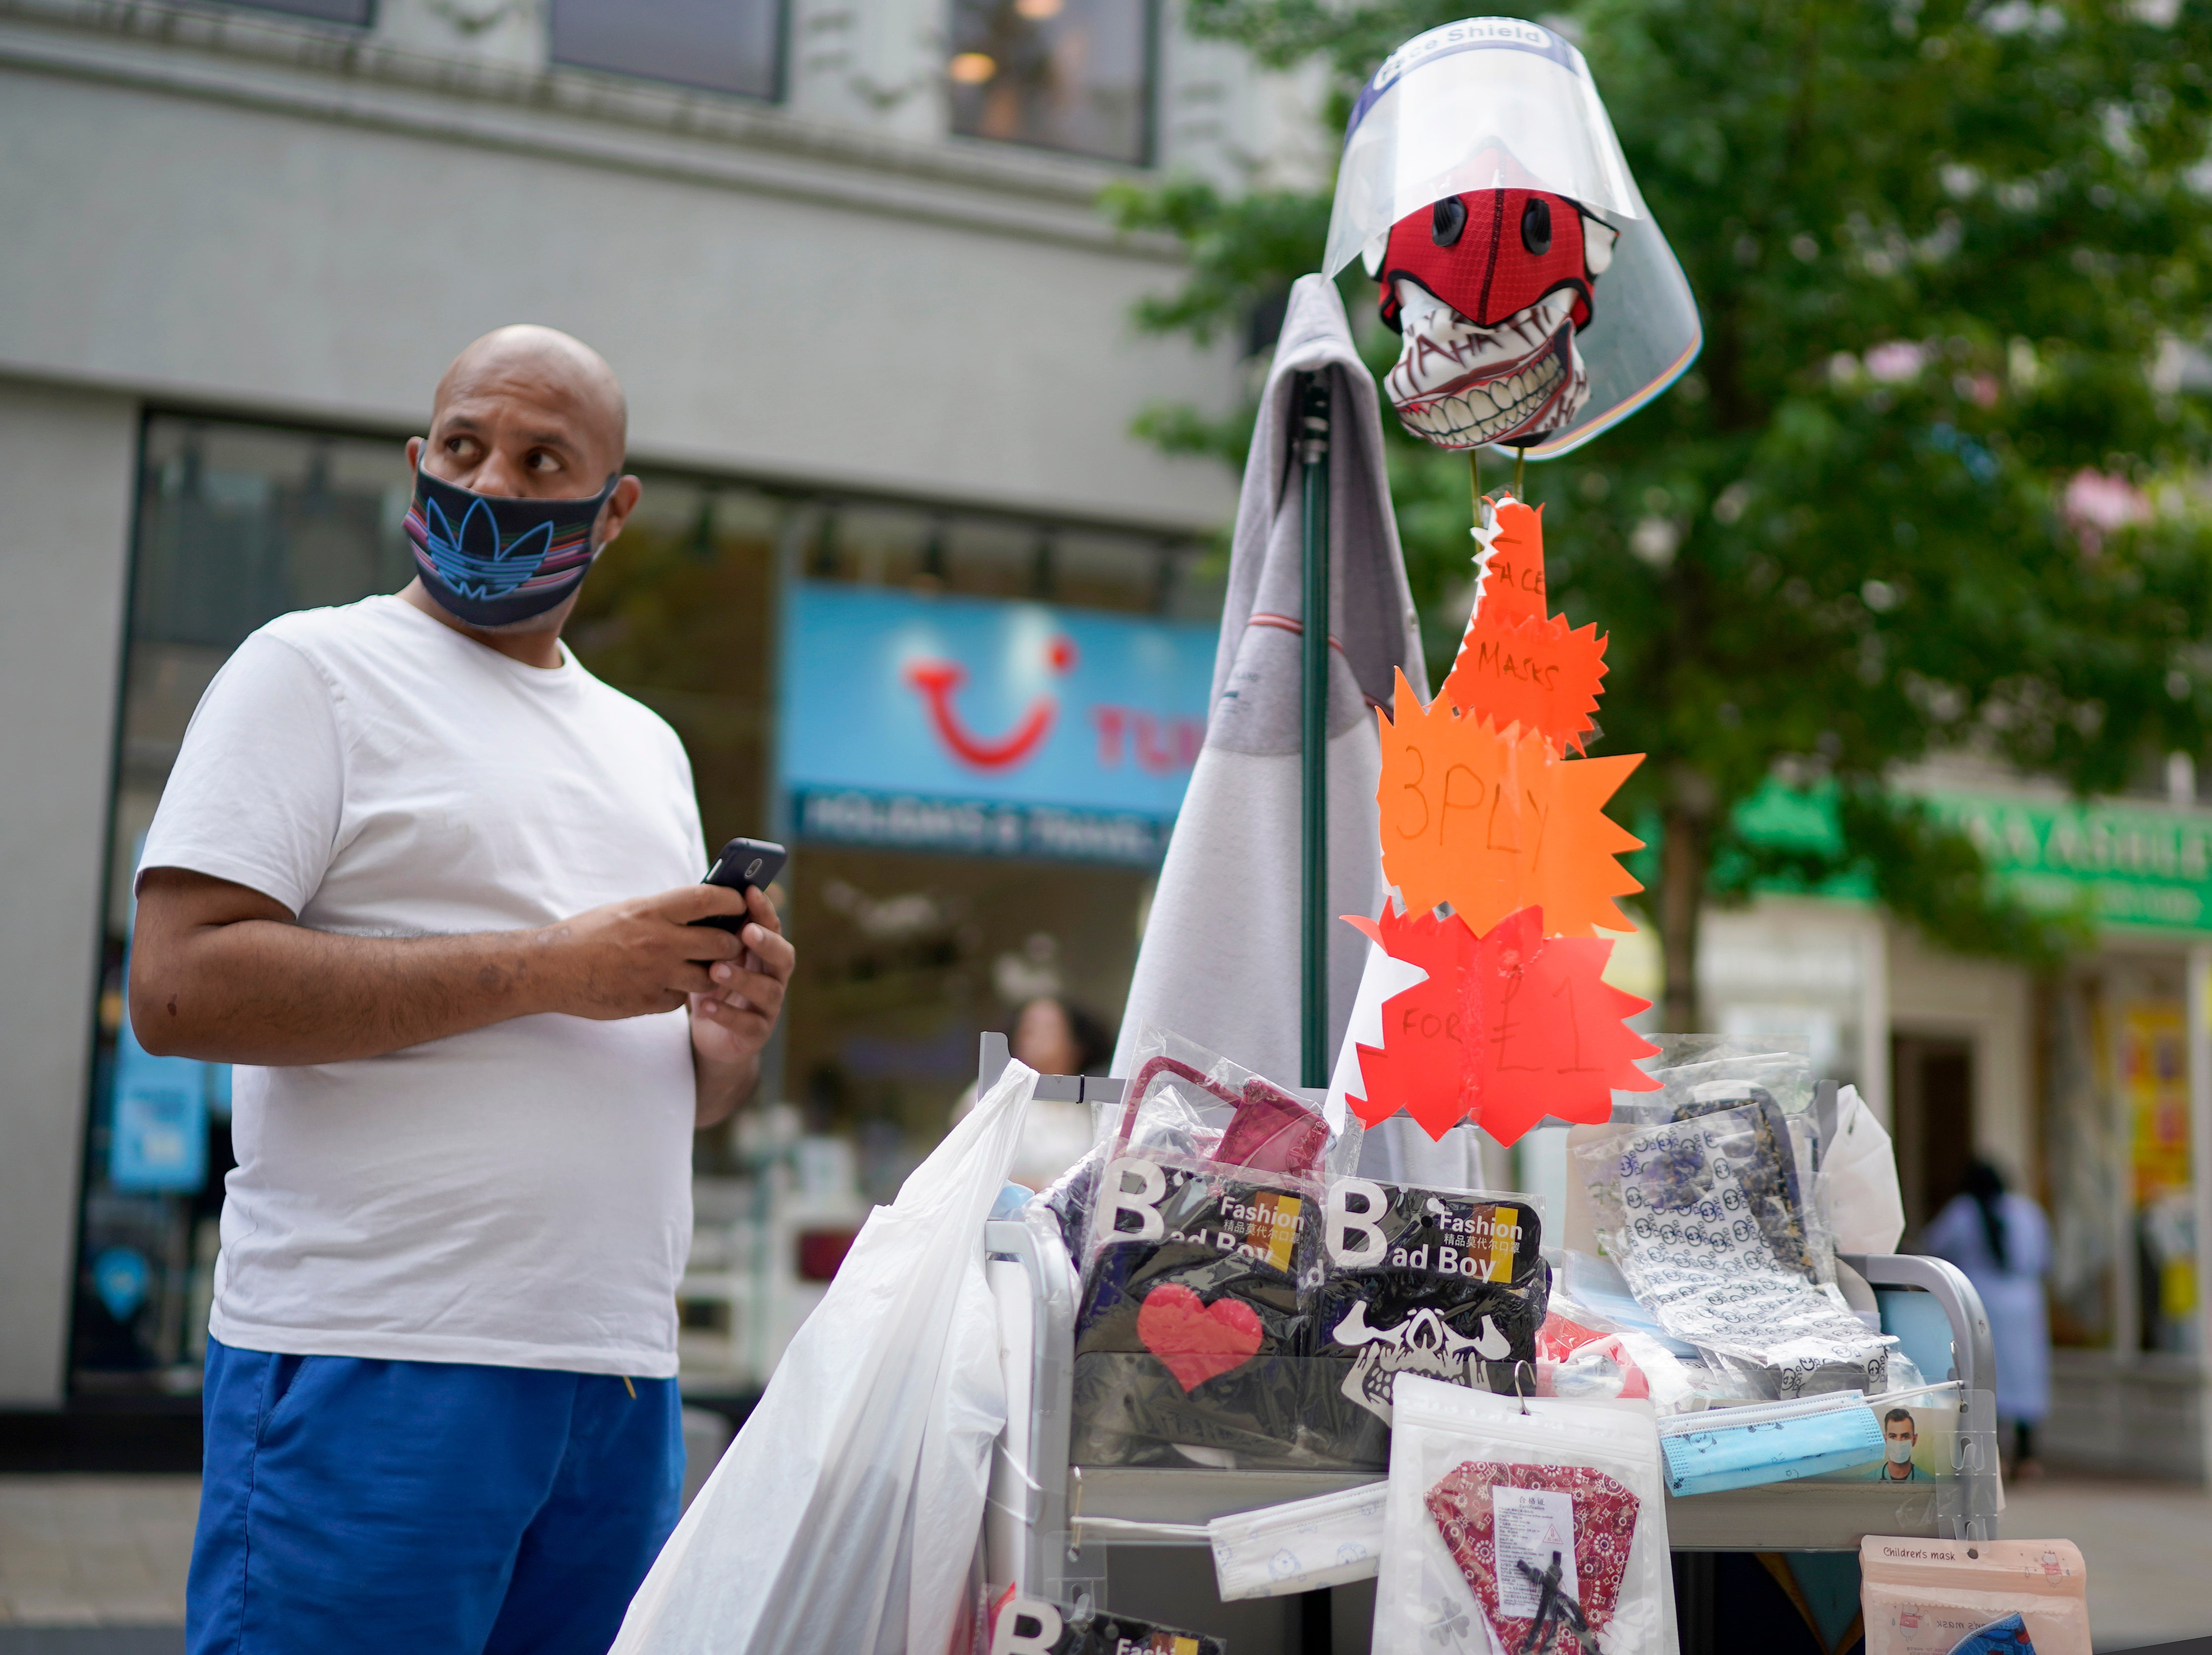 A street vendor selling domestic masks and visors works in Preston town centre during the coronavirus pandemic on 10 August